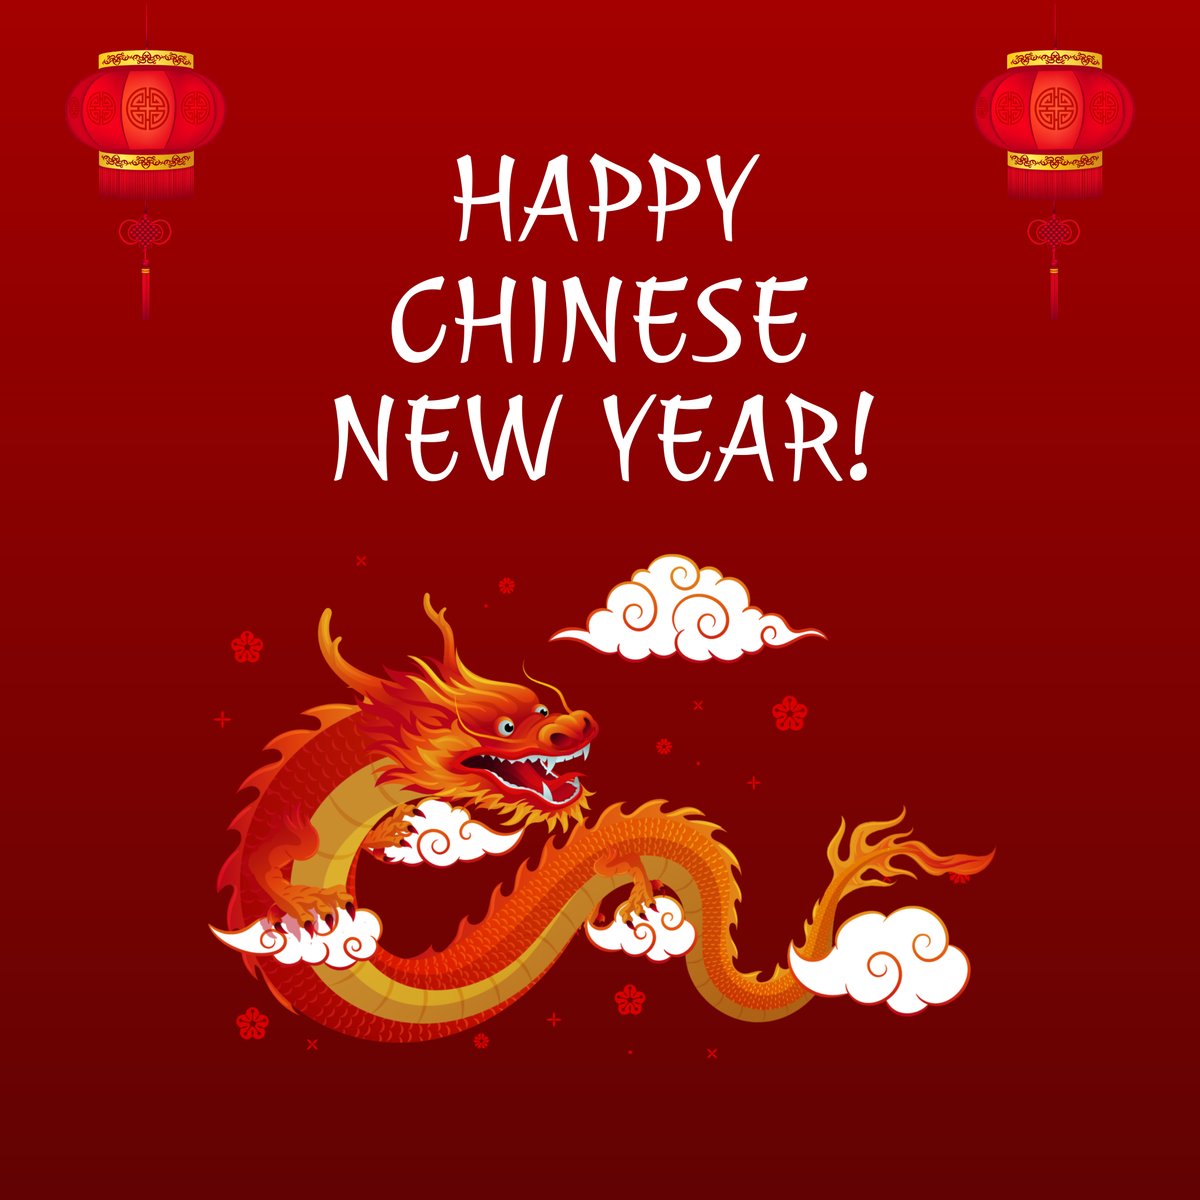 Happy Chinese New Year from Coach Sonny at Basketball Academy LI! Wishing you joy, prosperity, and success in the Year of the Wood Dragon. Keep working hard and never give up on your dreams. Let's make this year the best one yet! #ChineseNewYear #BasketballAcademyLI #YearOfTheRat